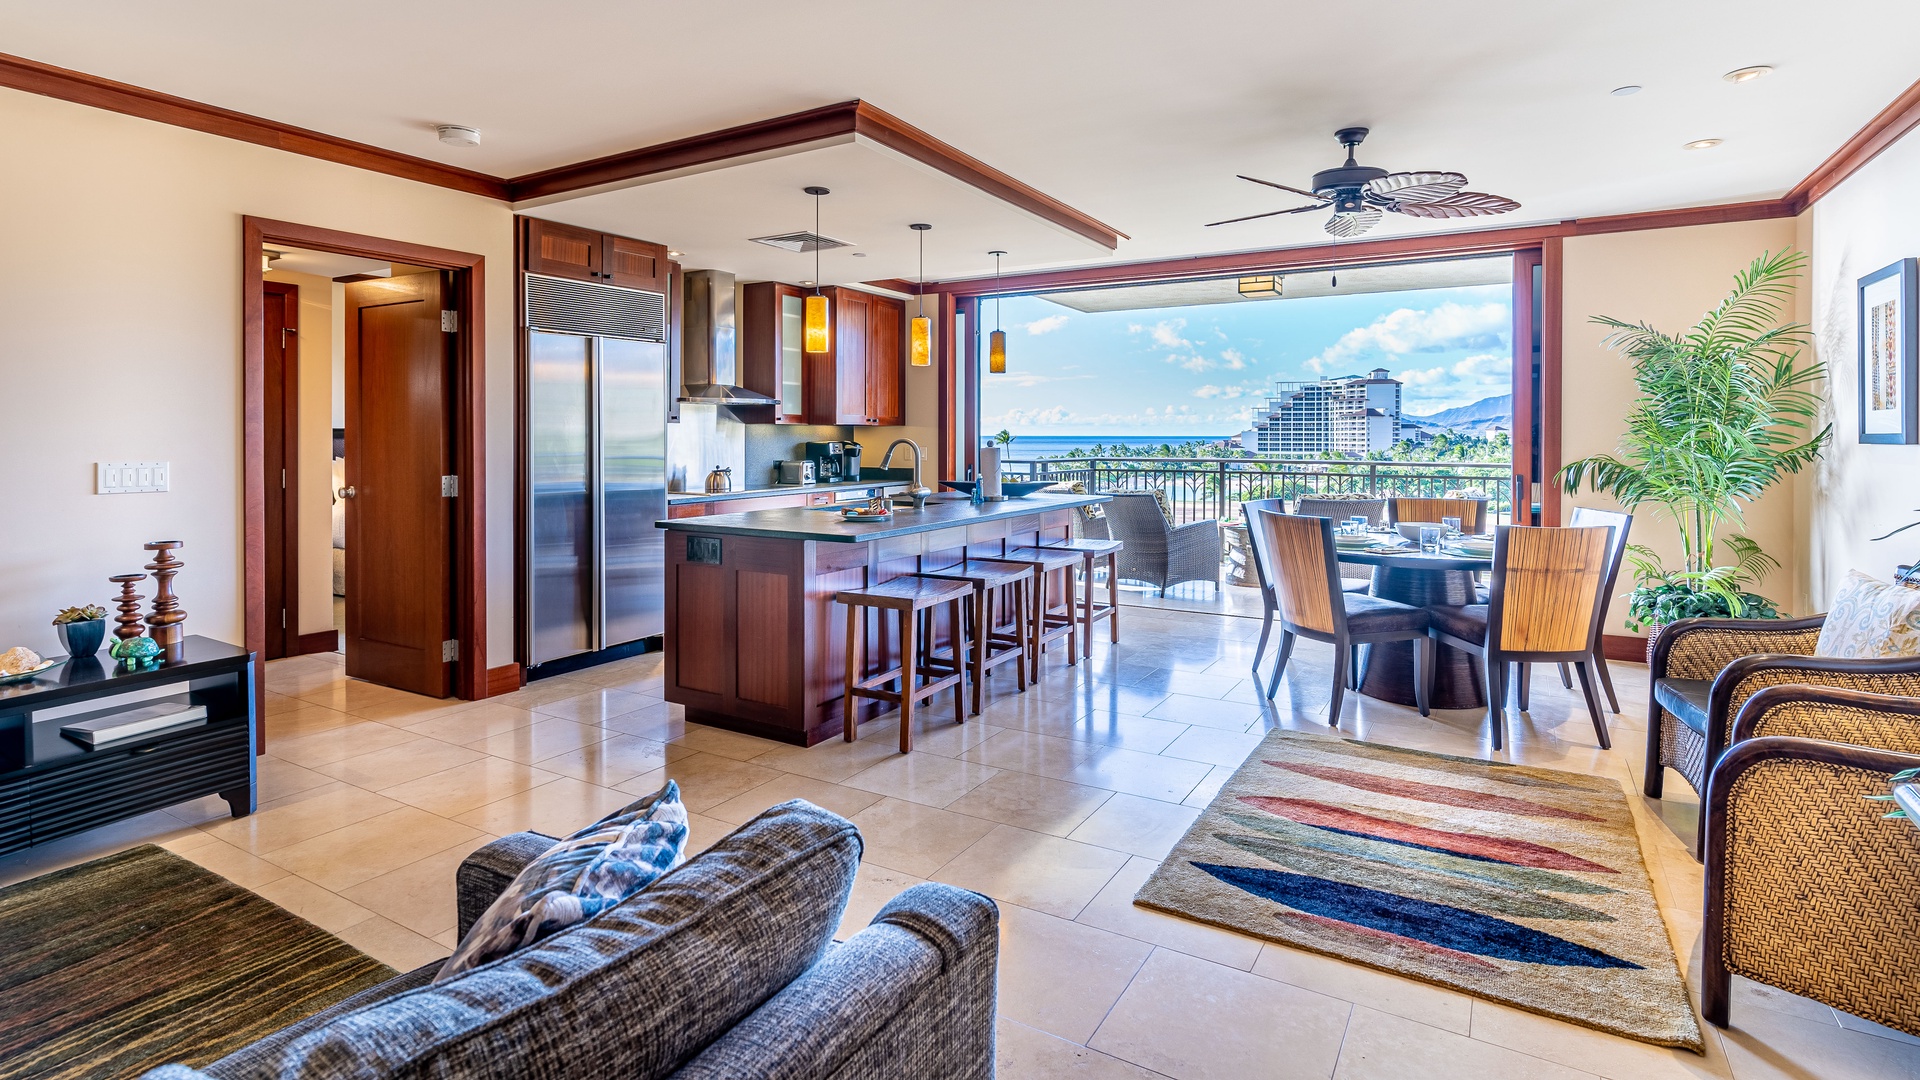 Kapolei Vacation Rentals, Ko Olina Beach Villas B706 - The open floor plan and fully equipped kitchen is a host's dream.